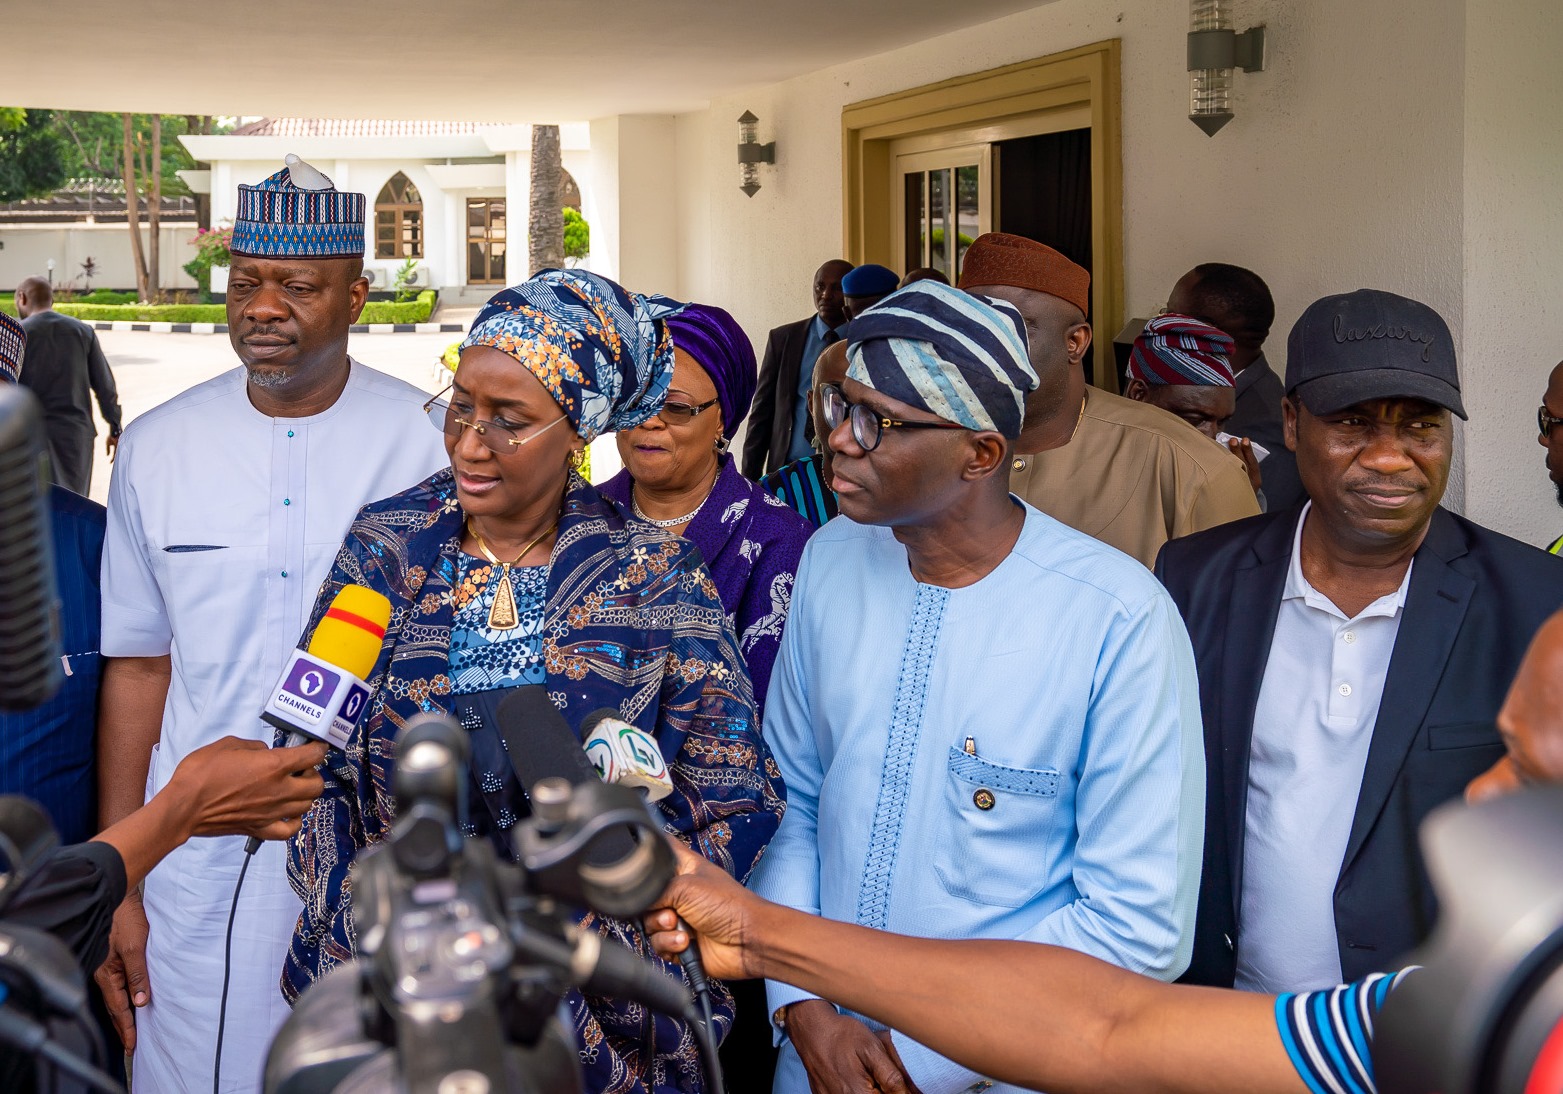 L-R: Chairman, House Committee on Emergency and Disaster, Hon. Tunji Olawuyi; Minister of Humanitarian Affairs, Disaster Management and Social Development, Hajiya Sadiya Umar Farouq; Lagos State Governor, Mr. Babajide Sanwo-Olu and his deputy, Dr. Obafemi Hamzat briefing journalists during a commiseration visit over the recent Abule-AdoSoba explosions at Lagos House, Marina, on Wednesday, March 18, 2020.